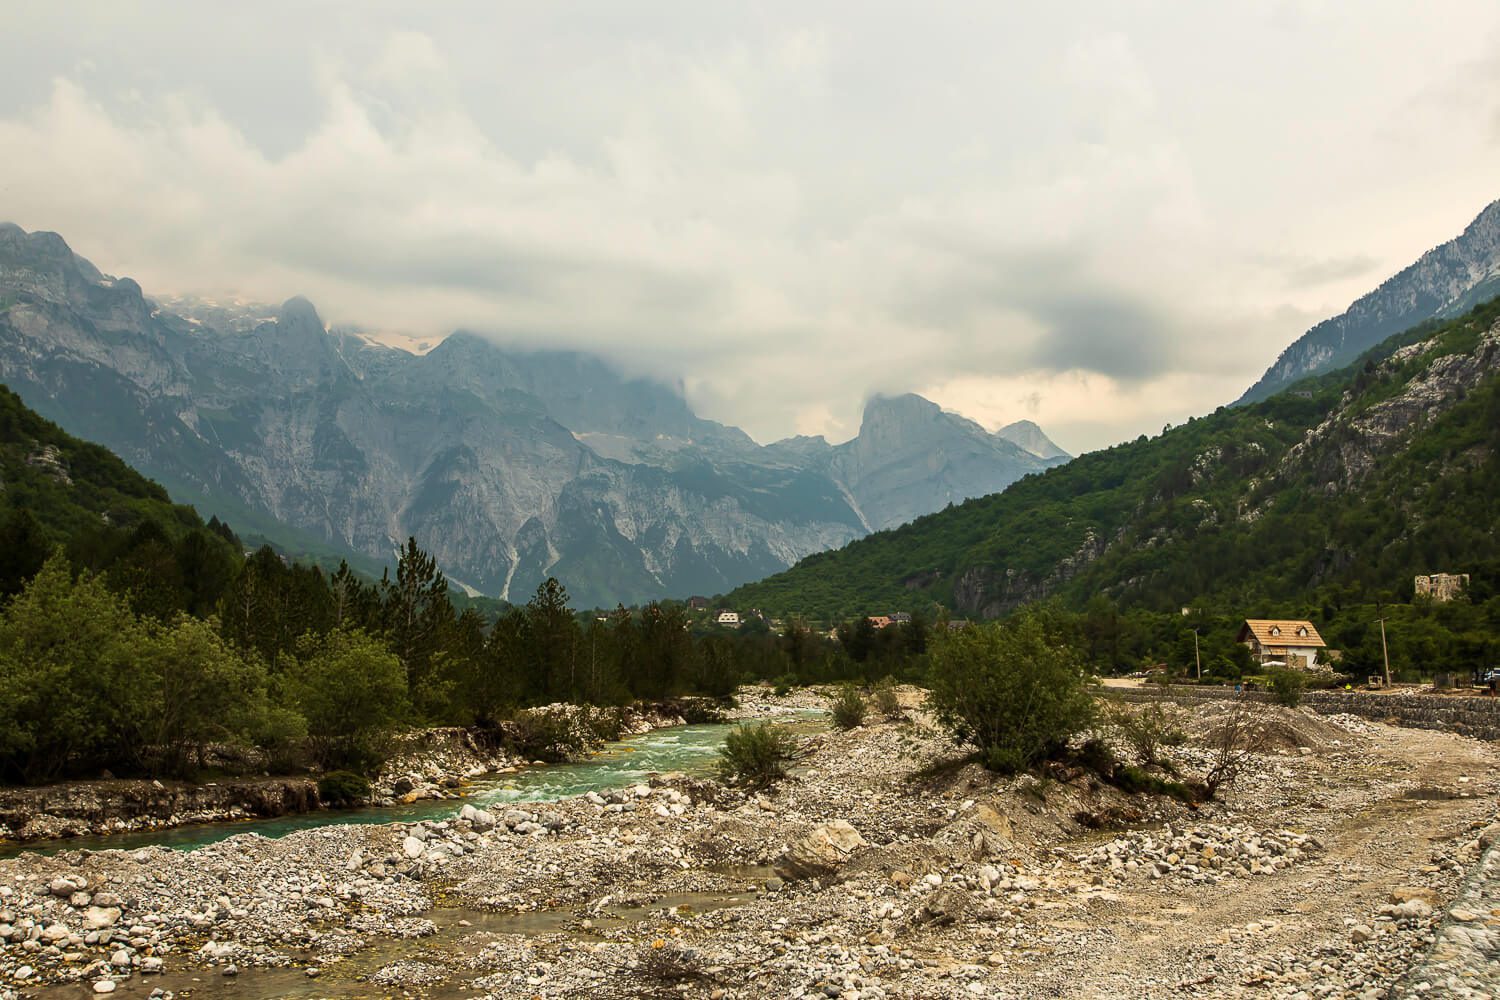 Valbona and Theth National Parks